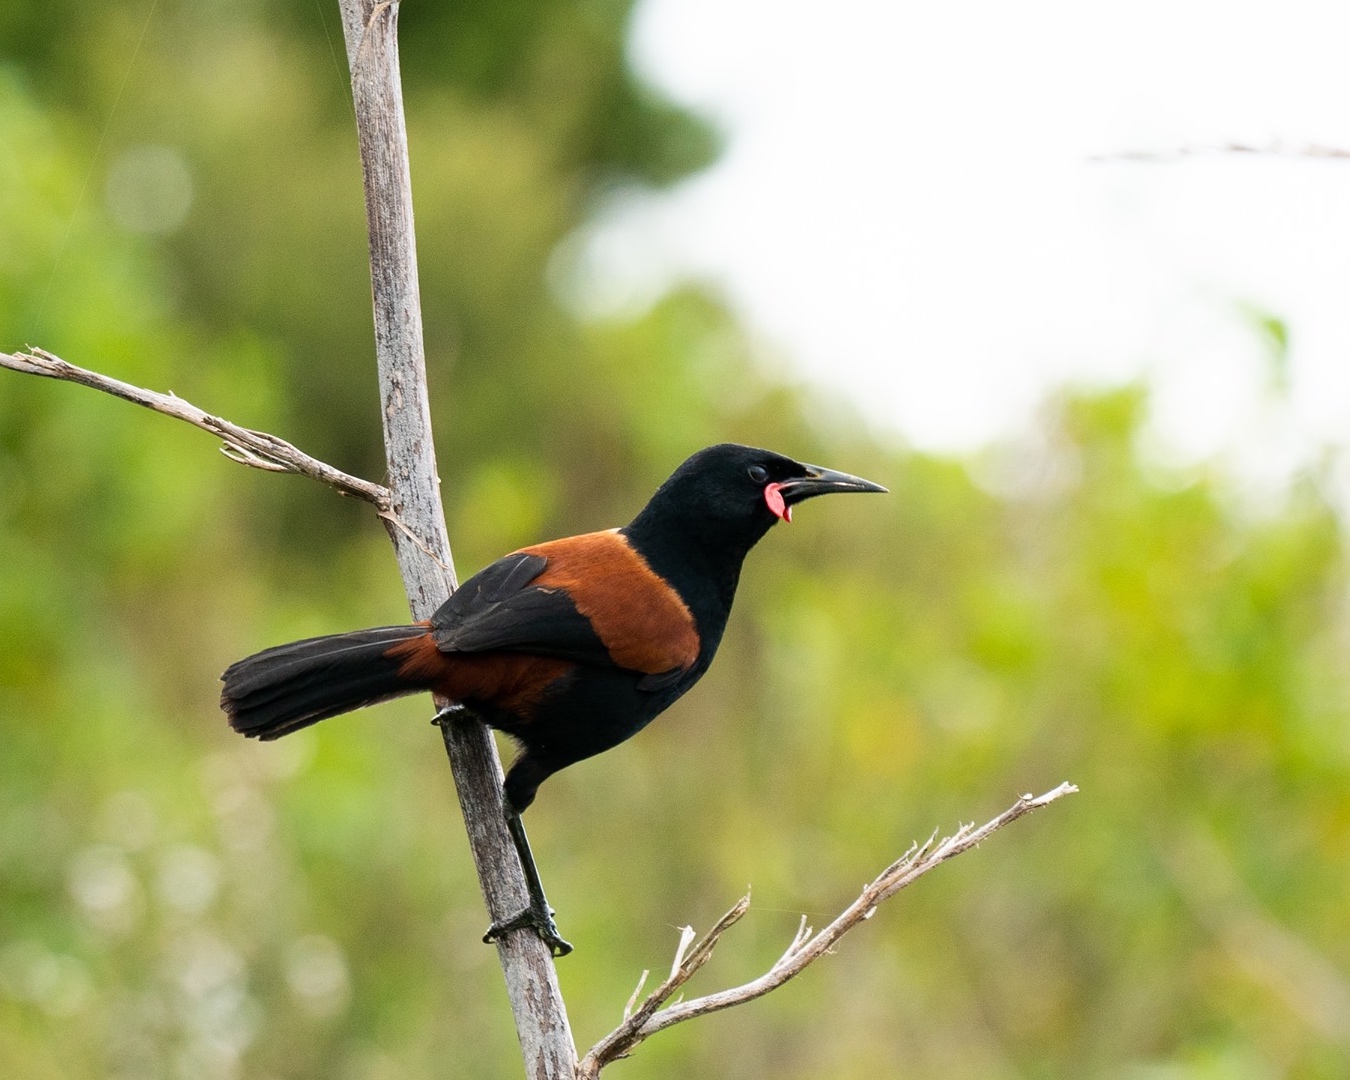 A black bird with an orange saddle-shaped mark on its back, perched on a branch. 